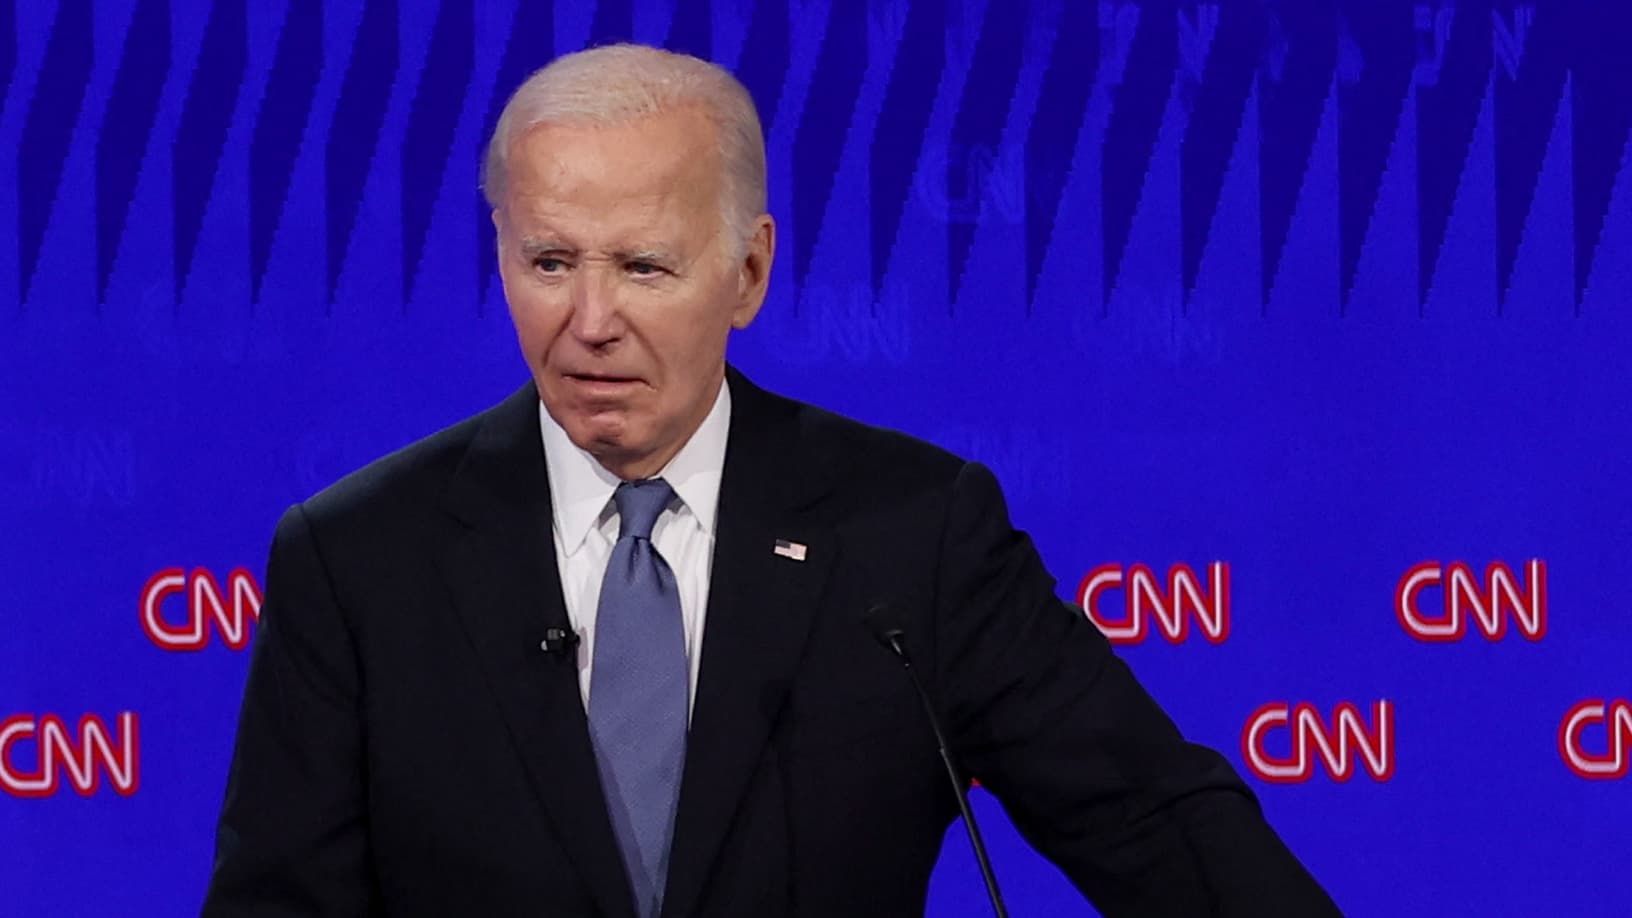 New York Times calls on Biden to drop out of White House race after debate with Trump